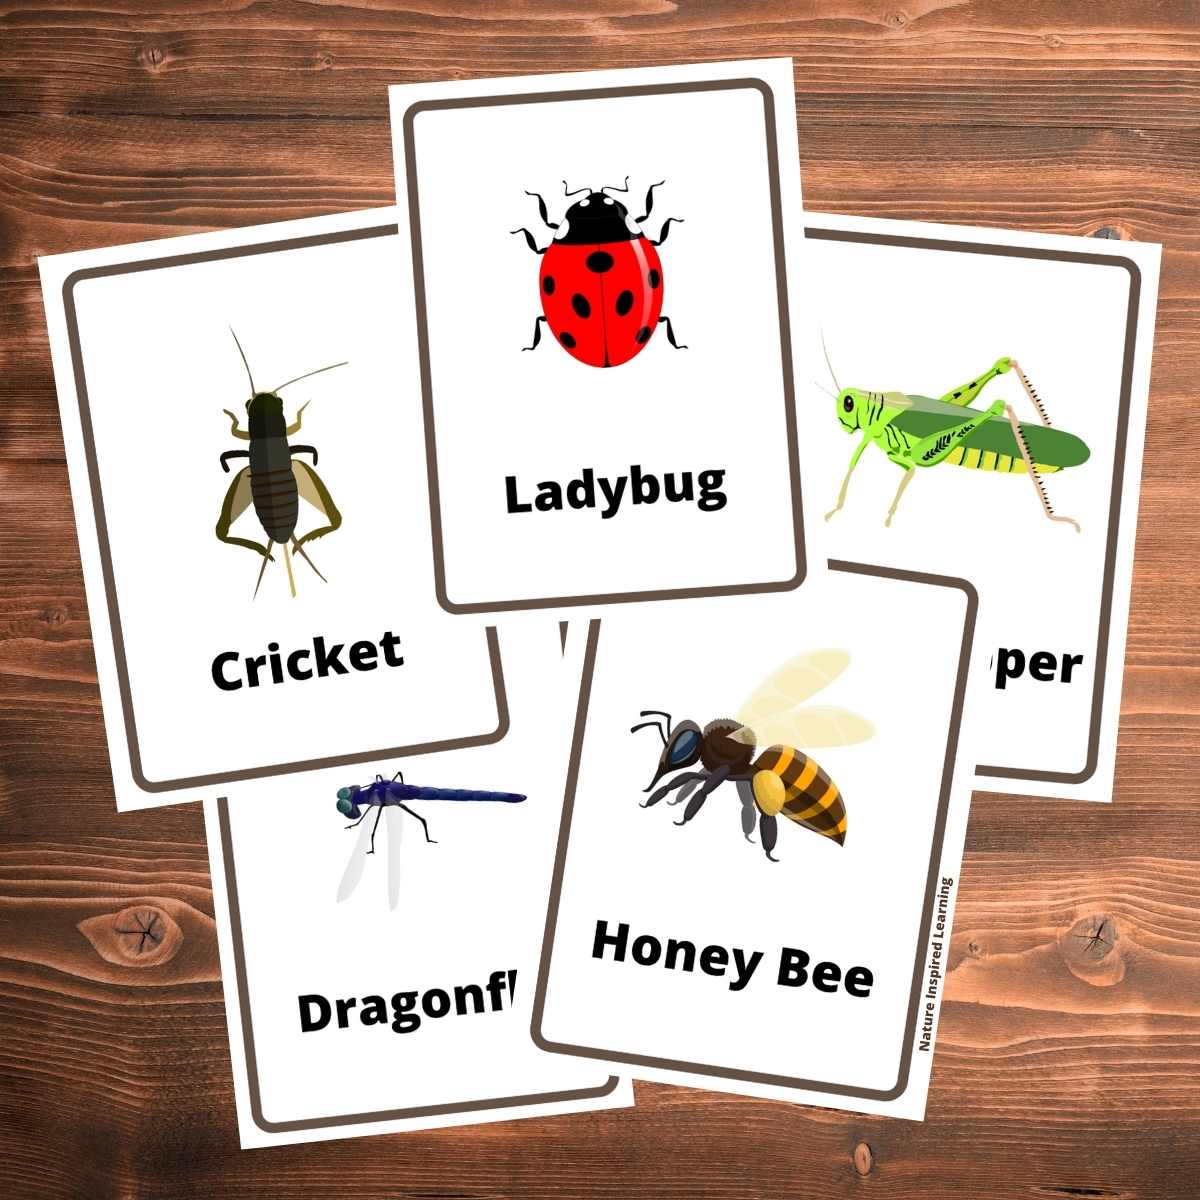 5 printable bug flashcards with colorful images of insects overlapping on a wooden background. Ladybug, grasshopper, honey bee, dragonfly, and cricket.